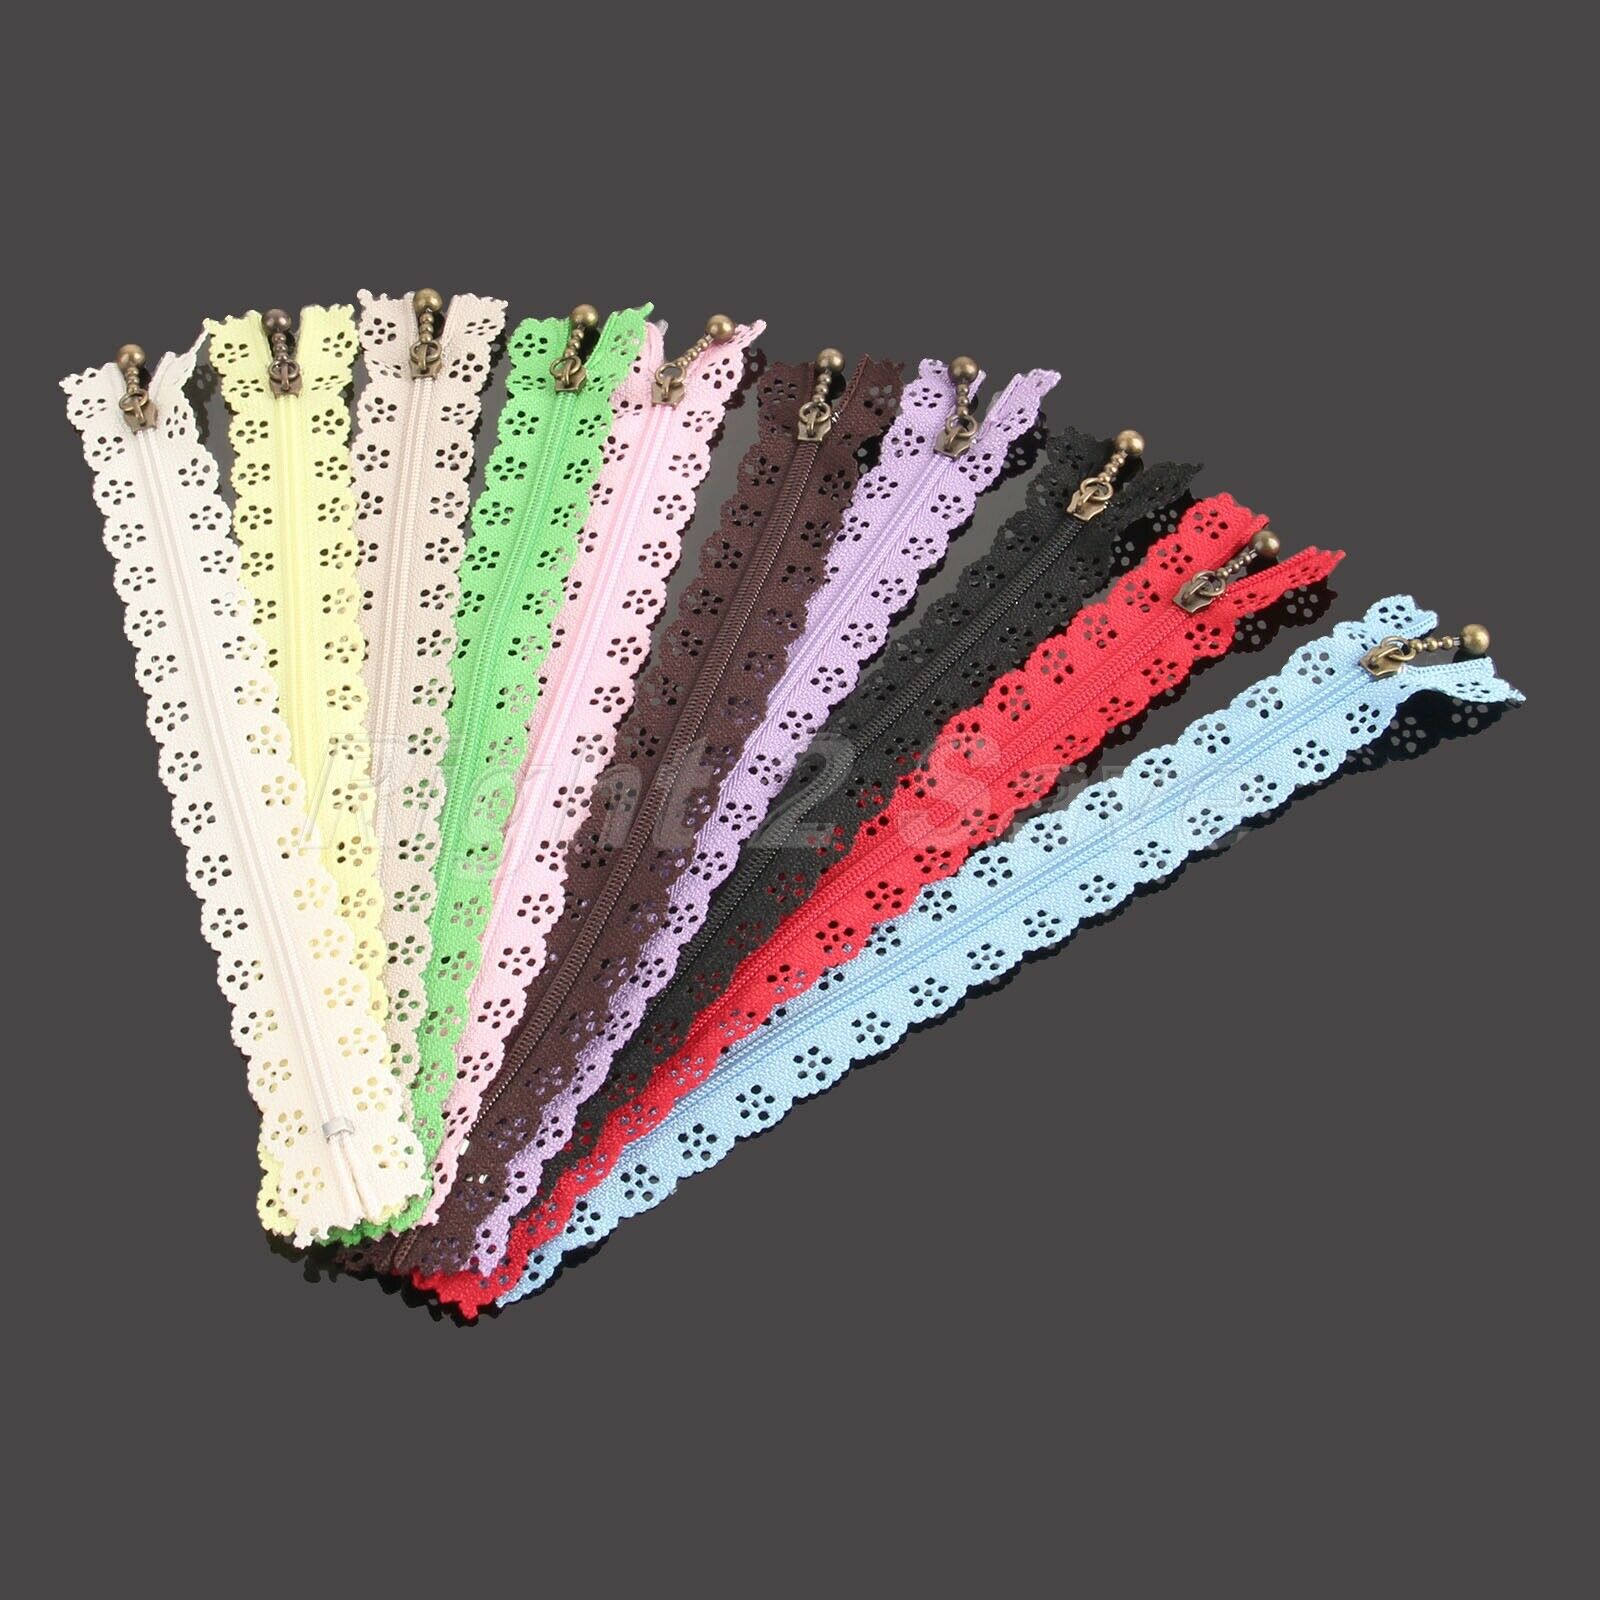 10Pcs 20cm Lace Zipper Nylon Closed End F Bags Clothing DIY Tailor Sewing Tools